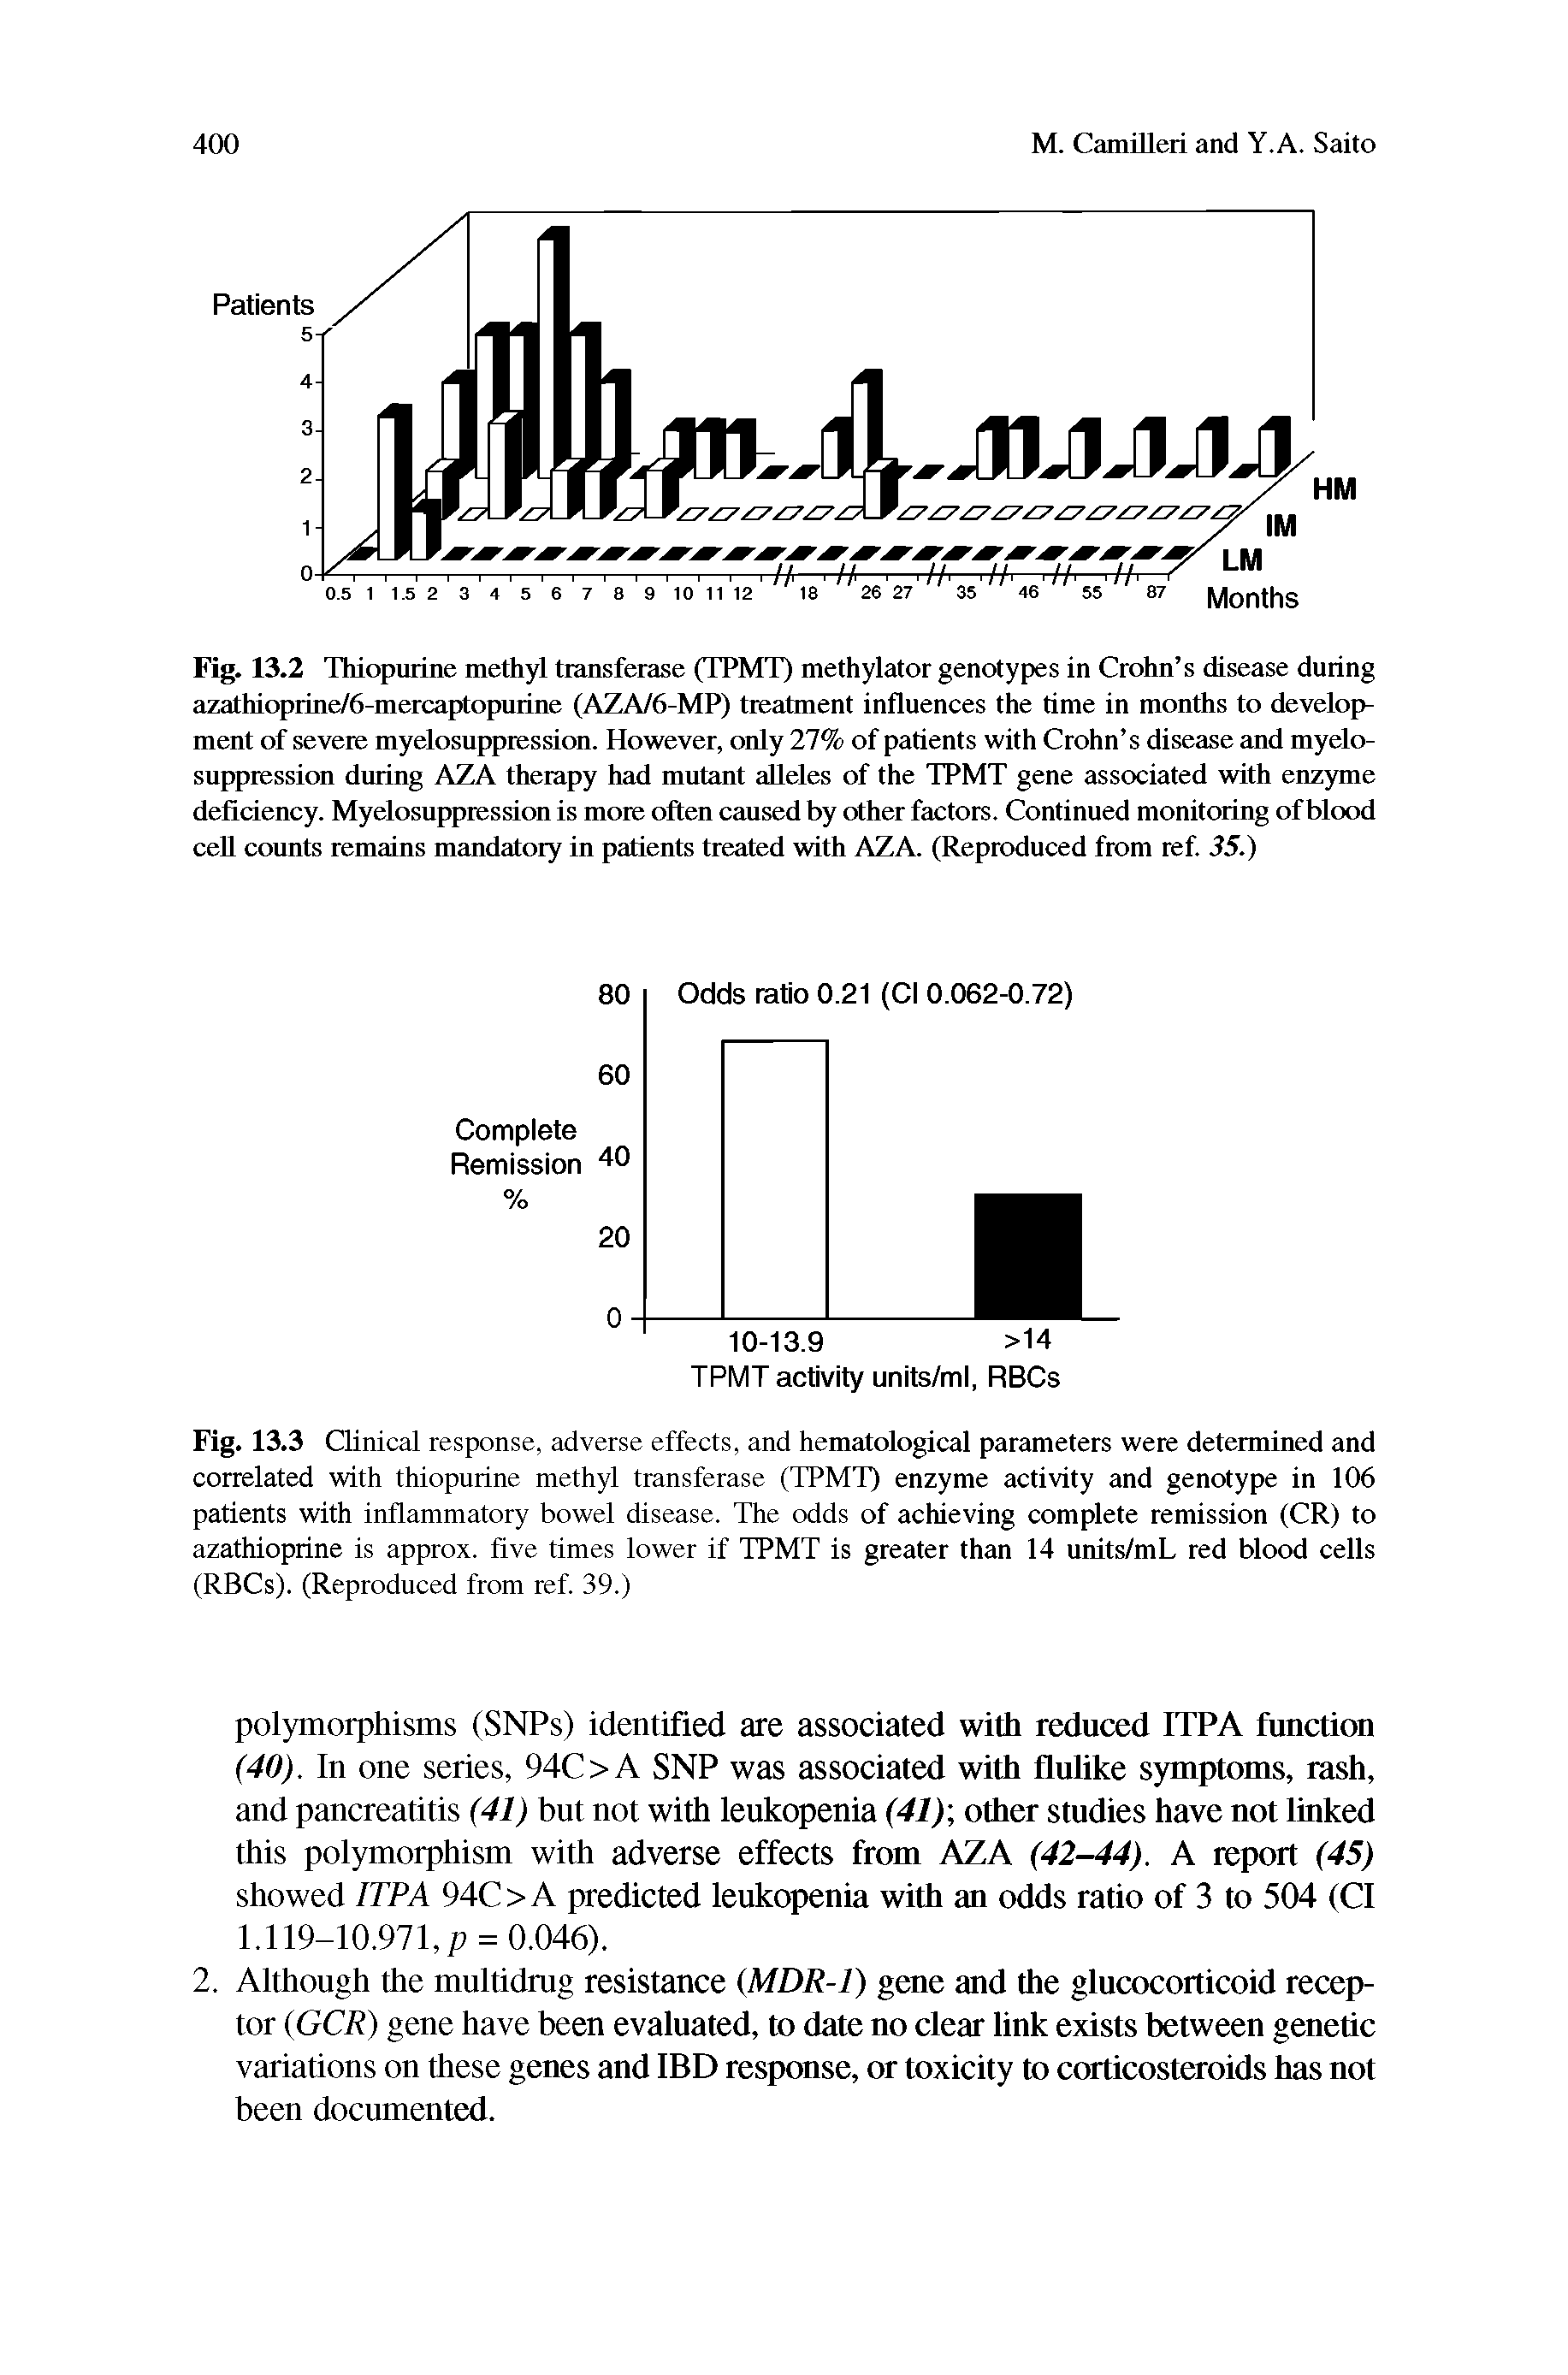 Fig. 13.3 Clinical response, adverse effects, and hematological parameters were determined and correlated with thiopurine methyl transferase (TPMT) enzyme activity and genotype in 106 patients with inflammatory bowel disease. The odds of achieving complete remission (CR) to azathioprine is approx, five times lower if TPMT is greater than 14 units/mL red blood cells (RBCs). (Reproduced from ref 39.)...